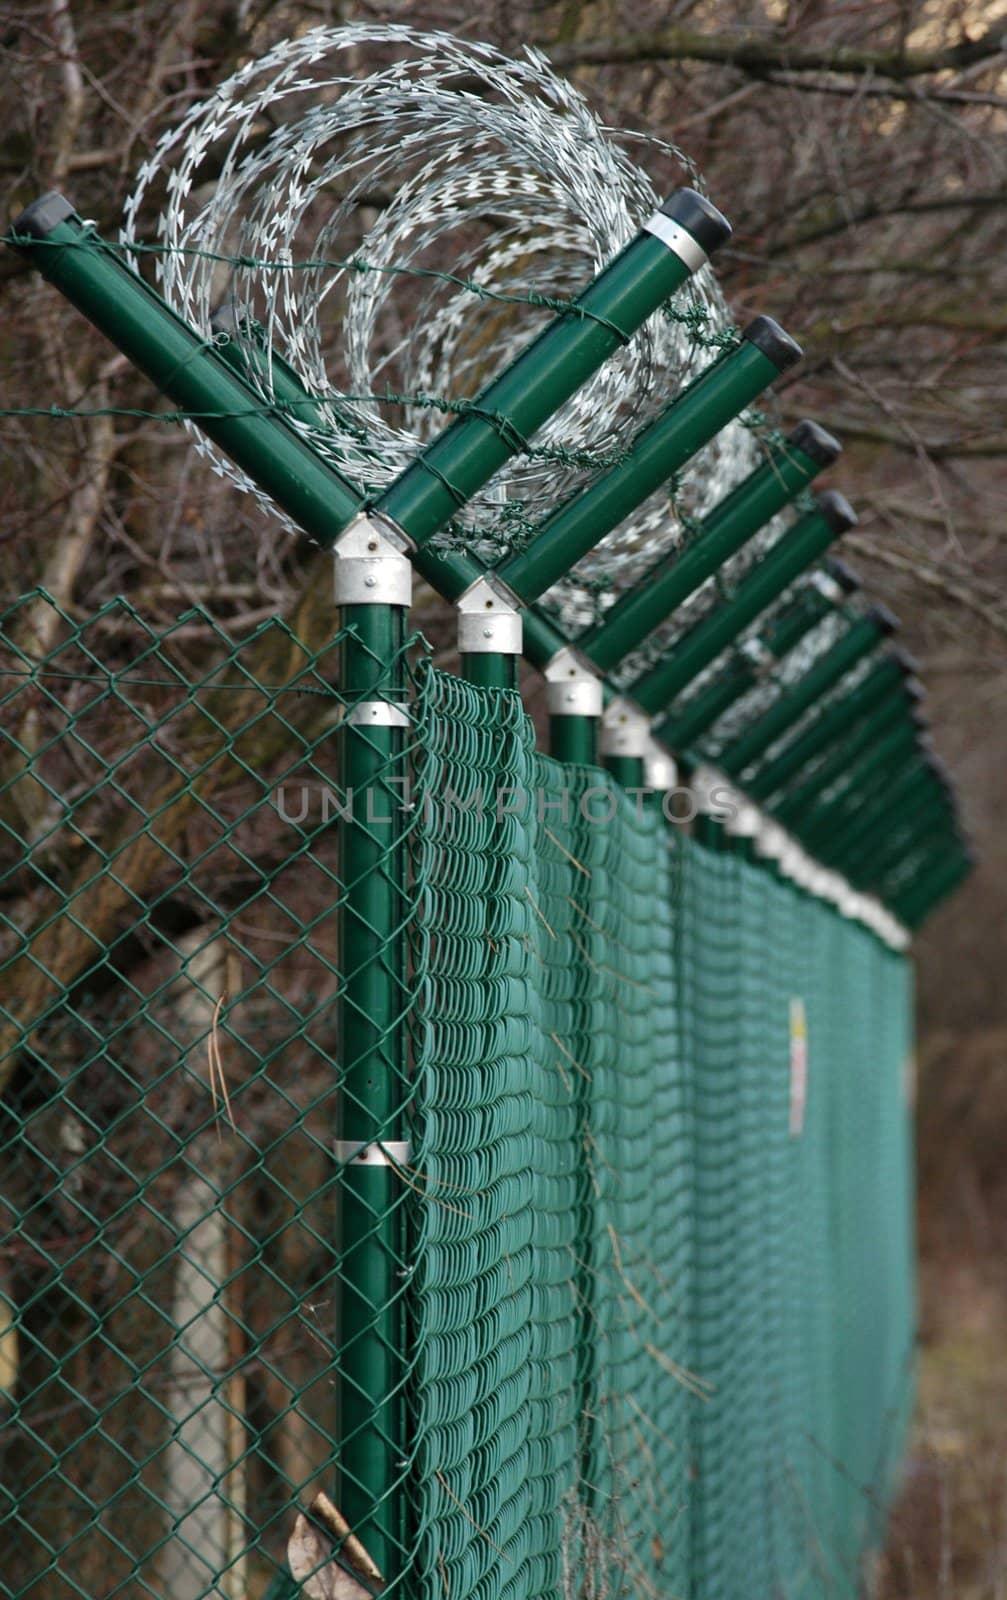 green wire fence around trees by haak78